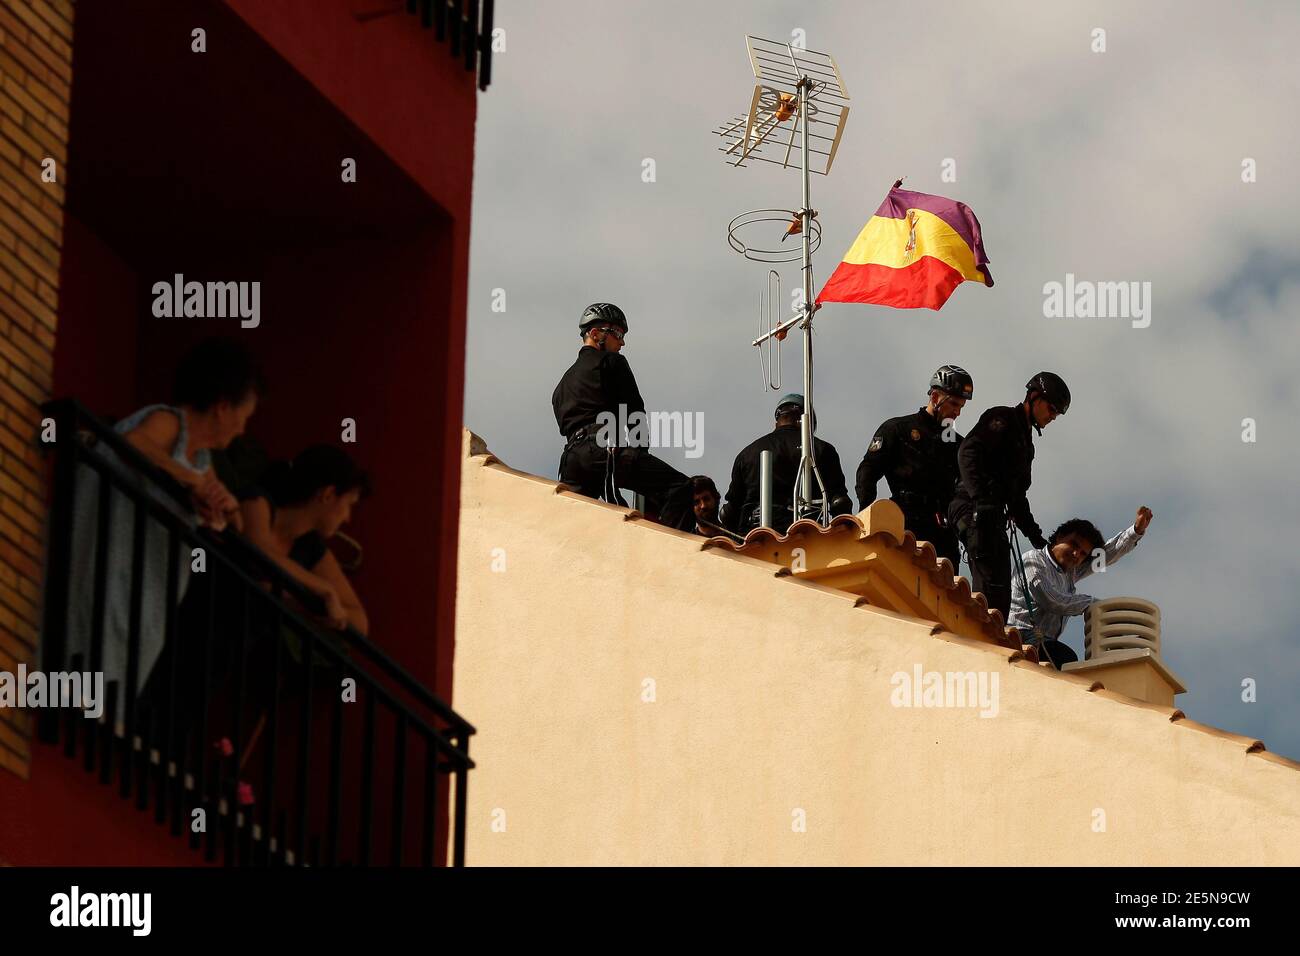 An activist raises his fist as he is detained by police next to a Spanish Republican era flag on a roof after Spanish riot police evicted several families of an unoccupied building of flats in Malaga, southern Spain October 3, 2013. A total of 13 families, included 12 children, had occupied the building since February. Members from various support platforms failed to stop the eviction and three activists were arrested when they refused to leave the roof of building, according to local media. REUTERS/Jon Nazca (SPAIN - Tags: CIVIL UNREST POLITICS BUSINESS REAL ESTATE SOCIETY) Stock Photo